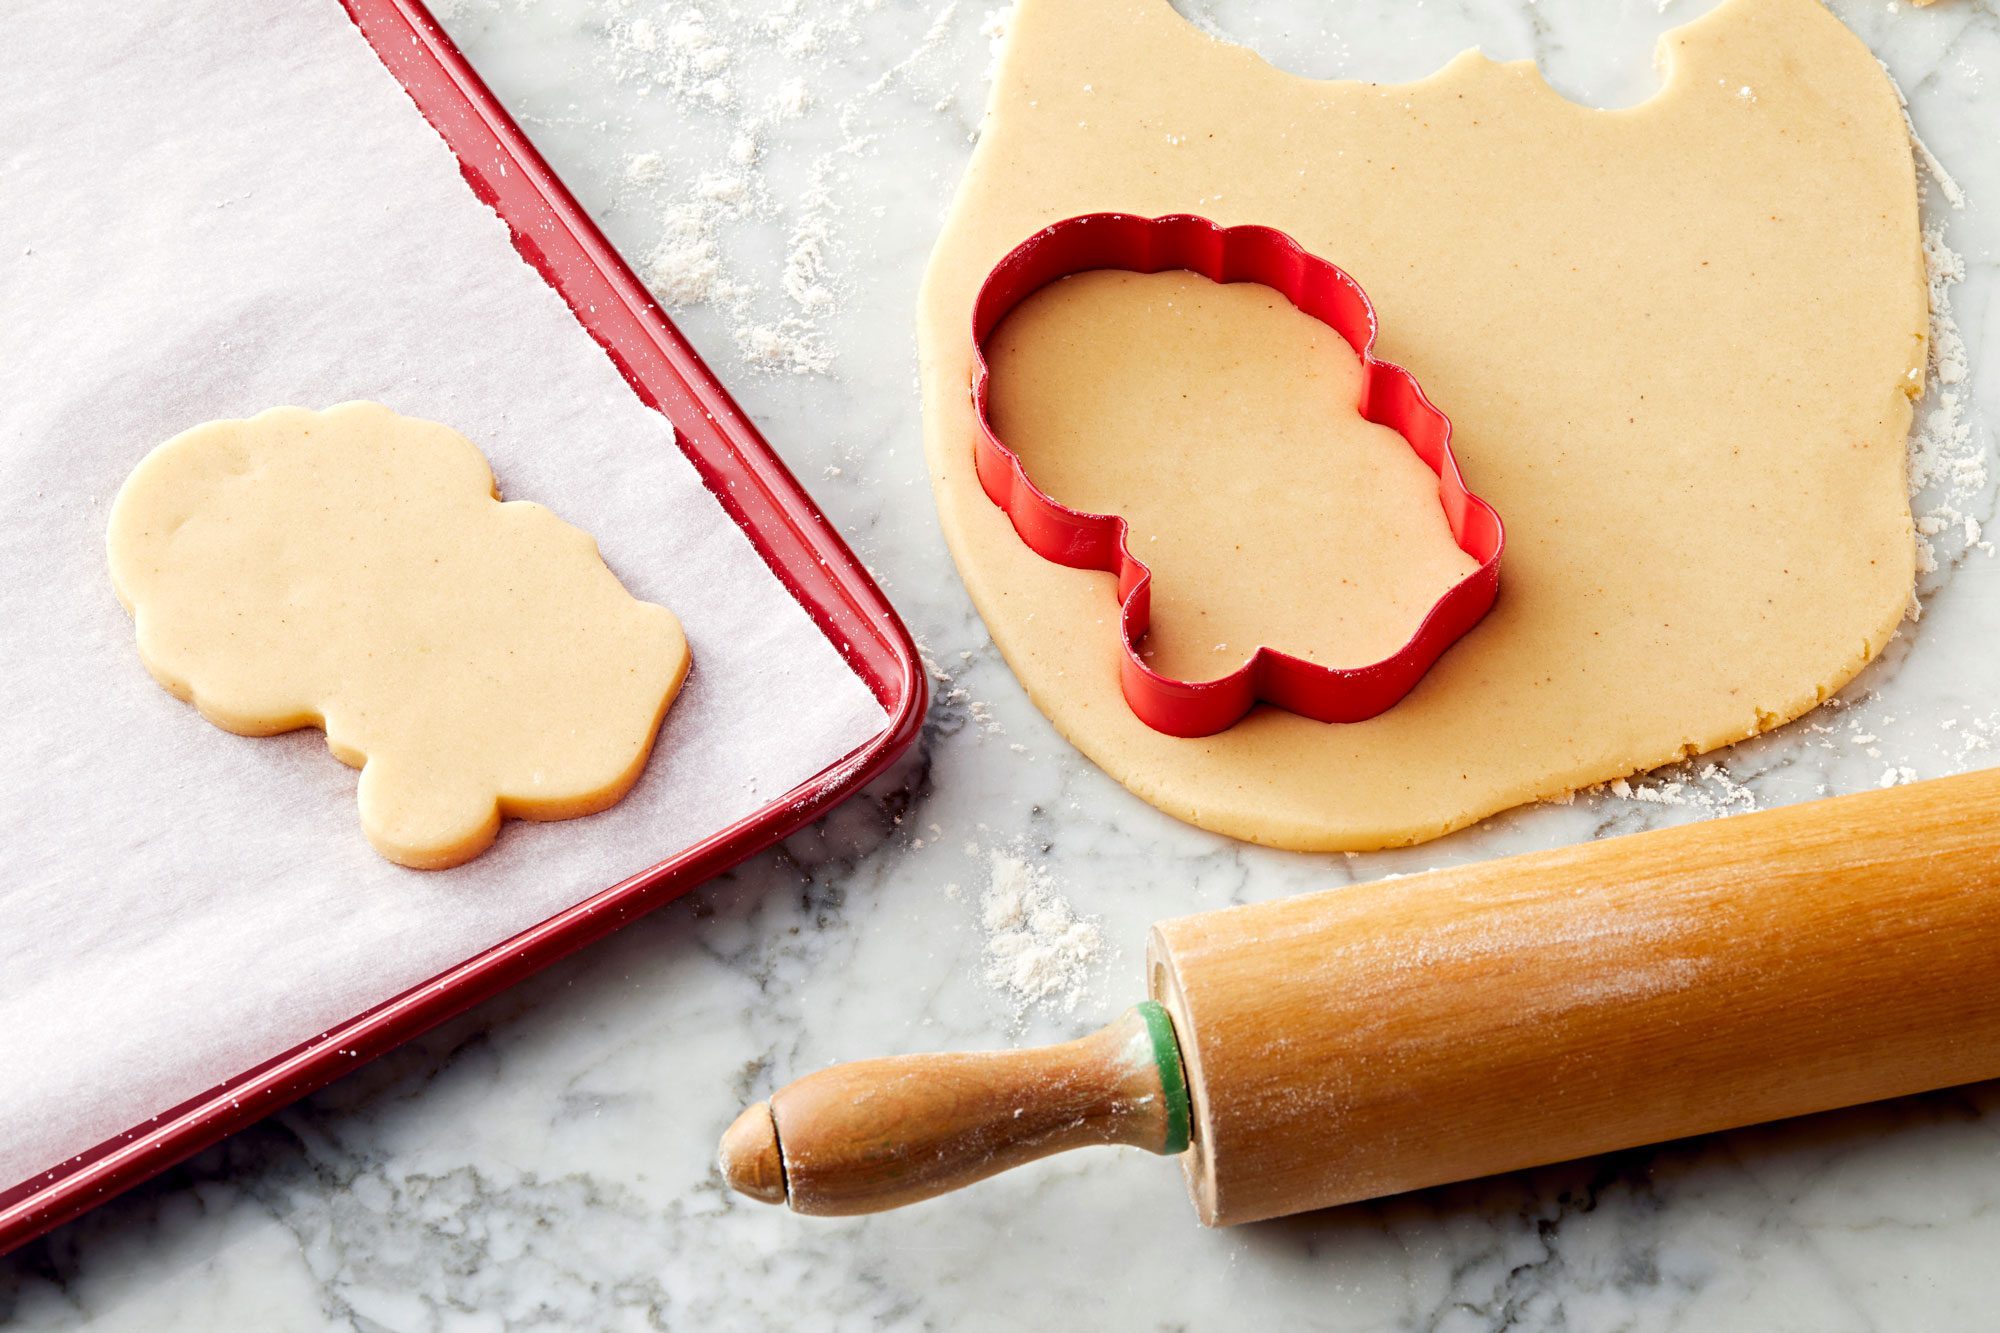 Roll each portion of dough to 1/4-in. thickness. Cut with a floured 3-in. with Santa-shaped cookie cutter.